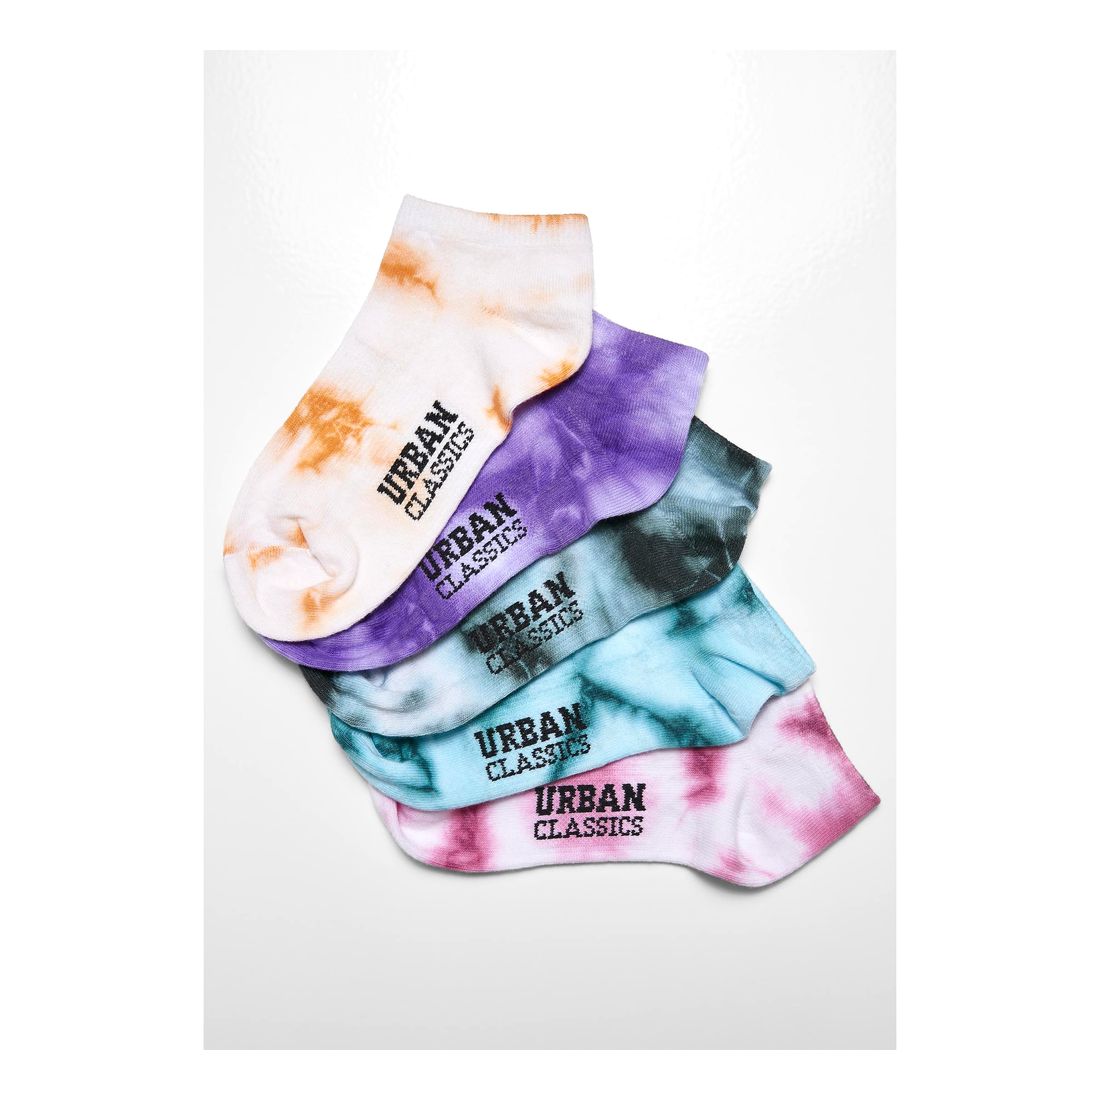 Urban Classics Tie Dye Invisible Girls' Socks (Assorted Colors) (Pack of 5)